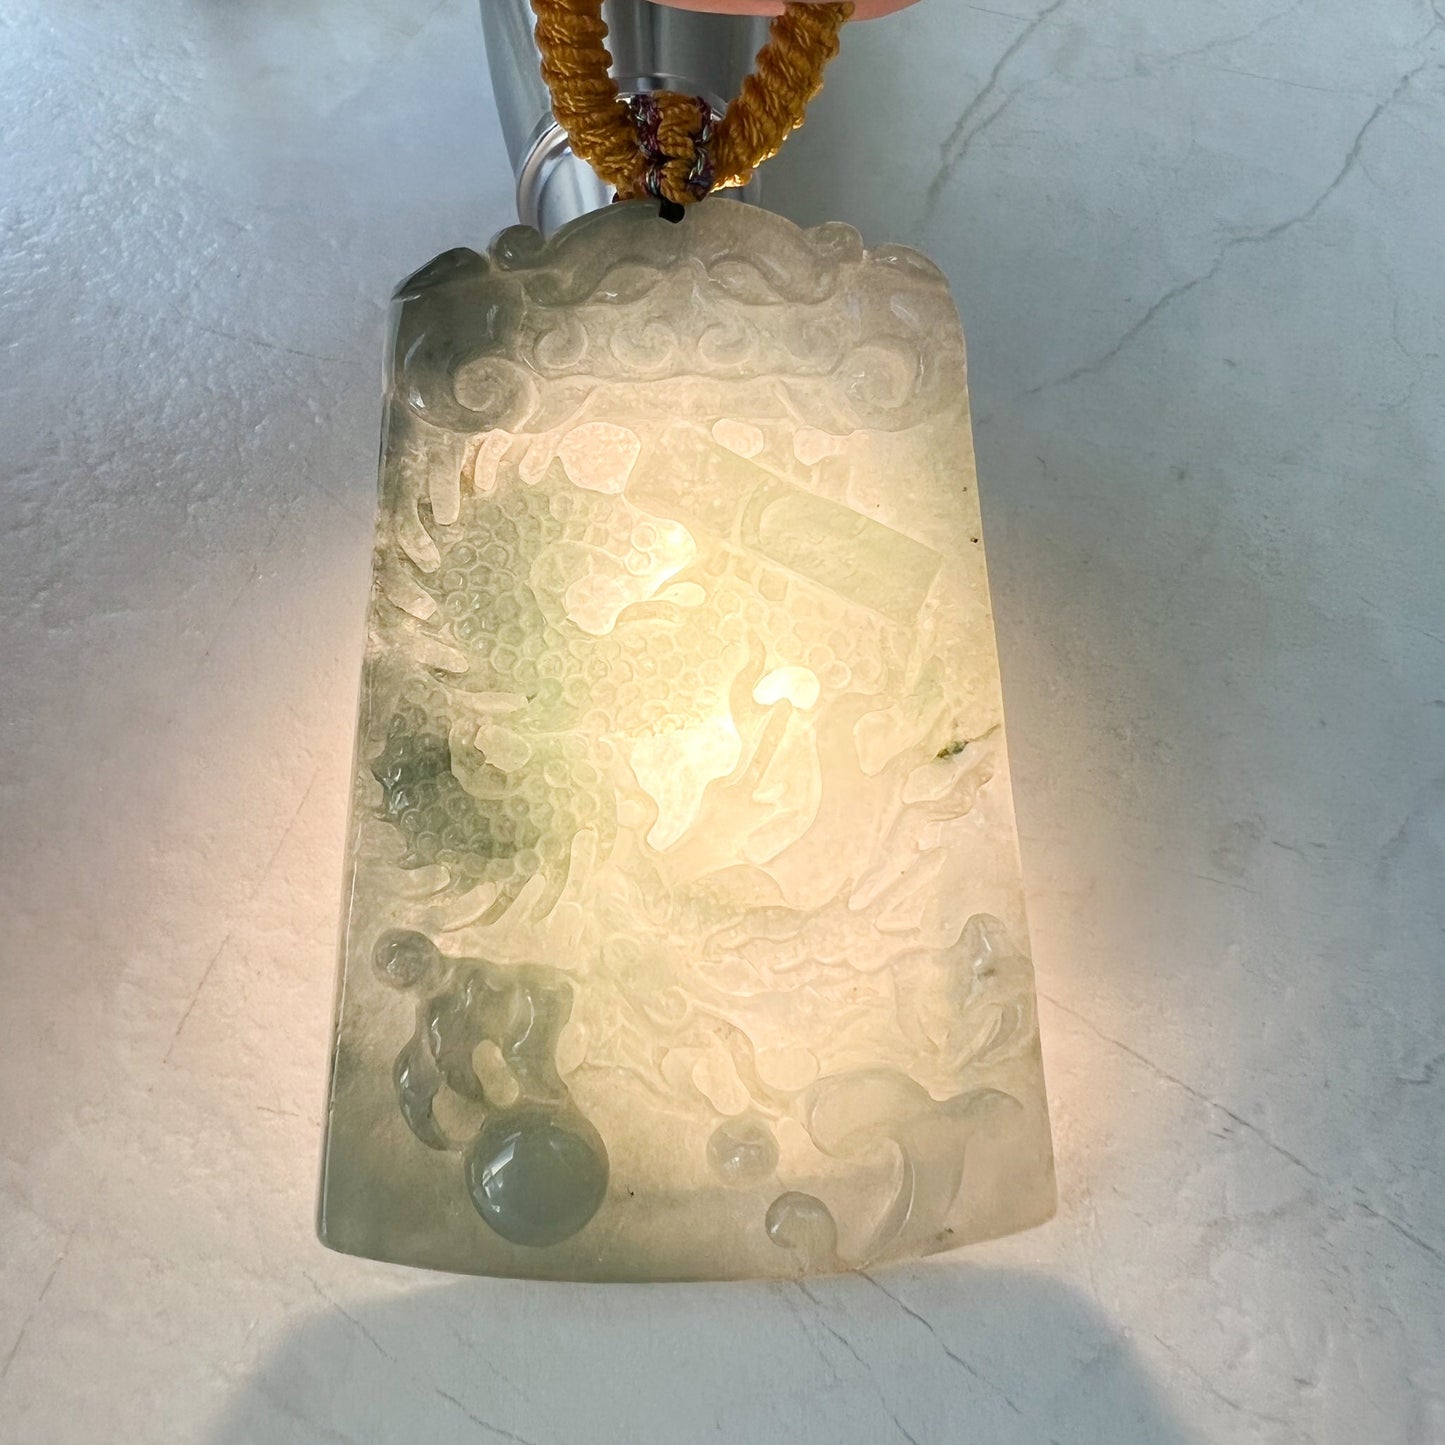 Jadeite Jade Dragon,Translucent Icy Blue Green, Chinese Zodiac Hand Carved Pendant Necklace, YJ-1221-0279051 - AriaDesignCollection